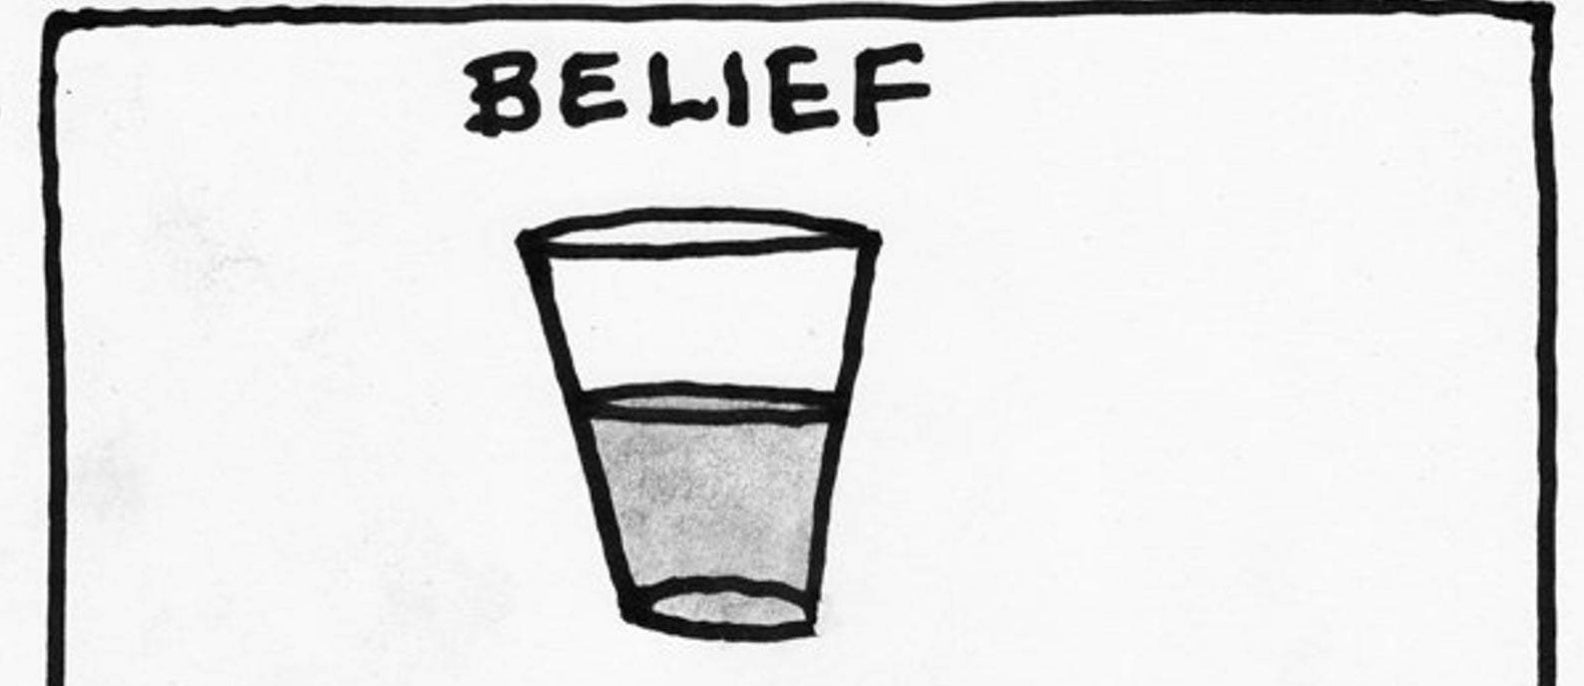 What I Do About "Belief"